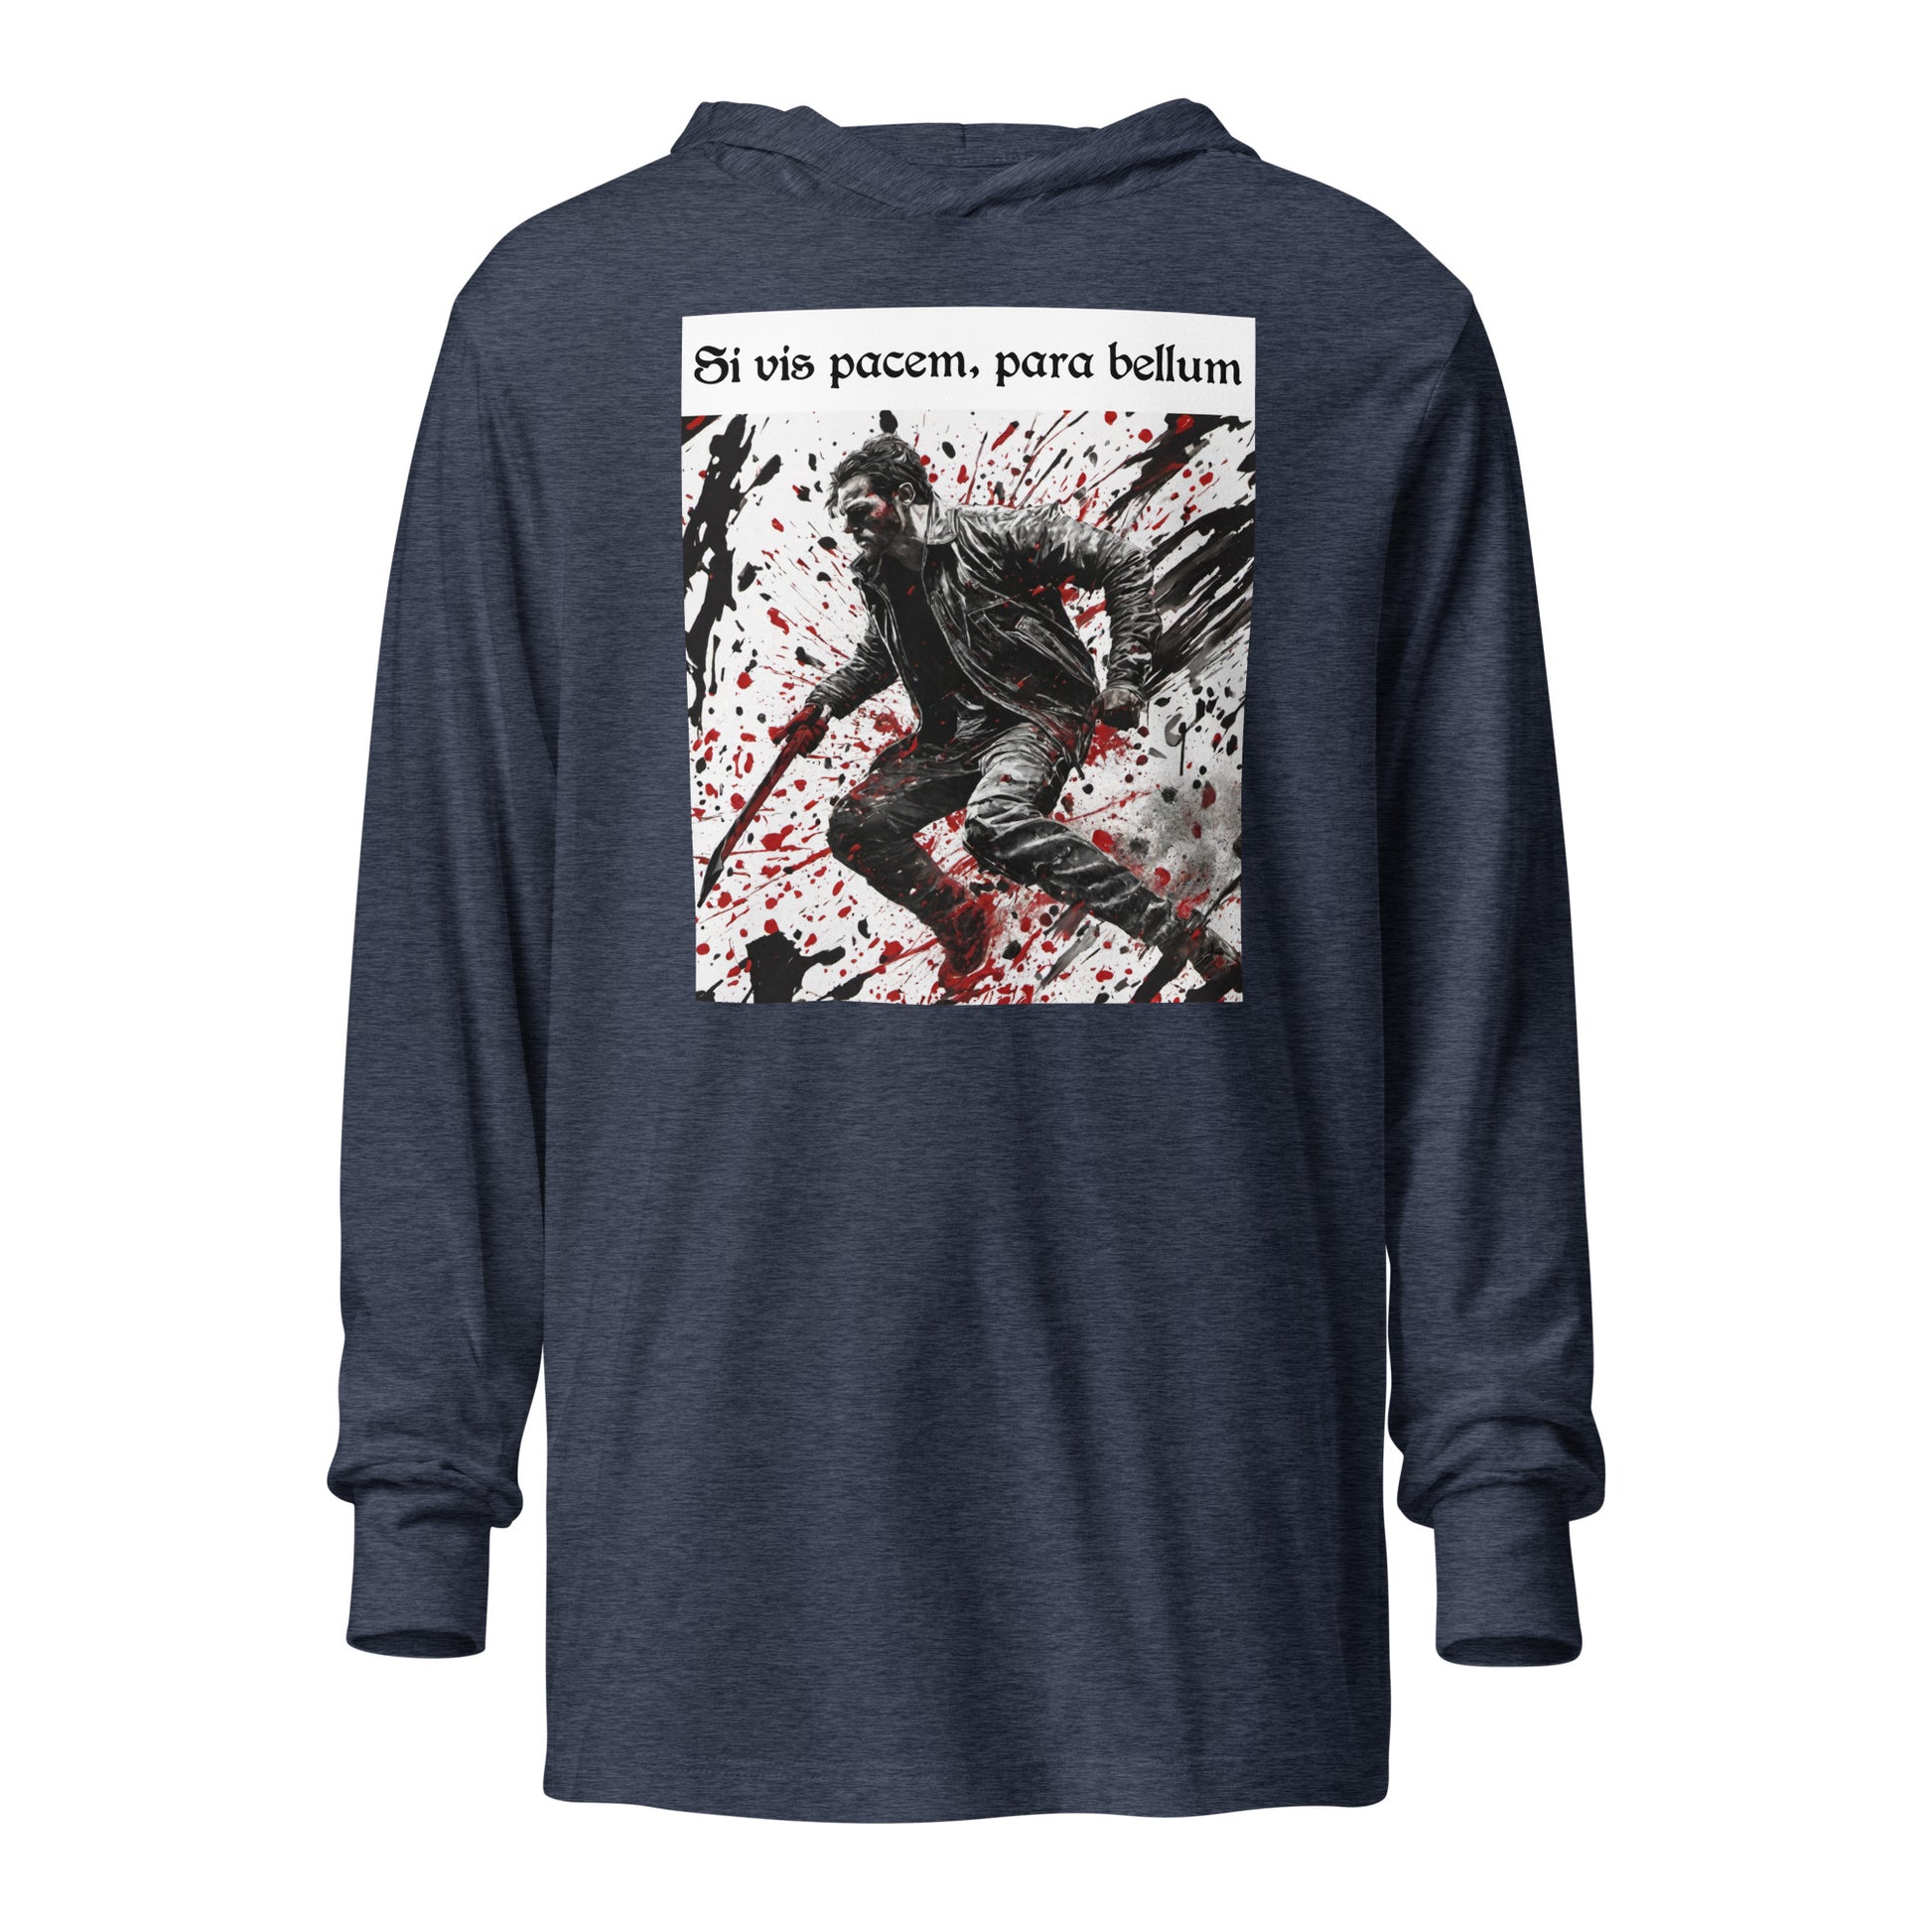 If You Want Peace, Prepare for War Men's Hooded Long-Sleeve Tee Heather Navy